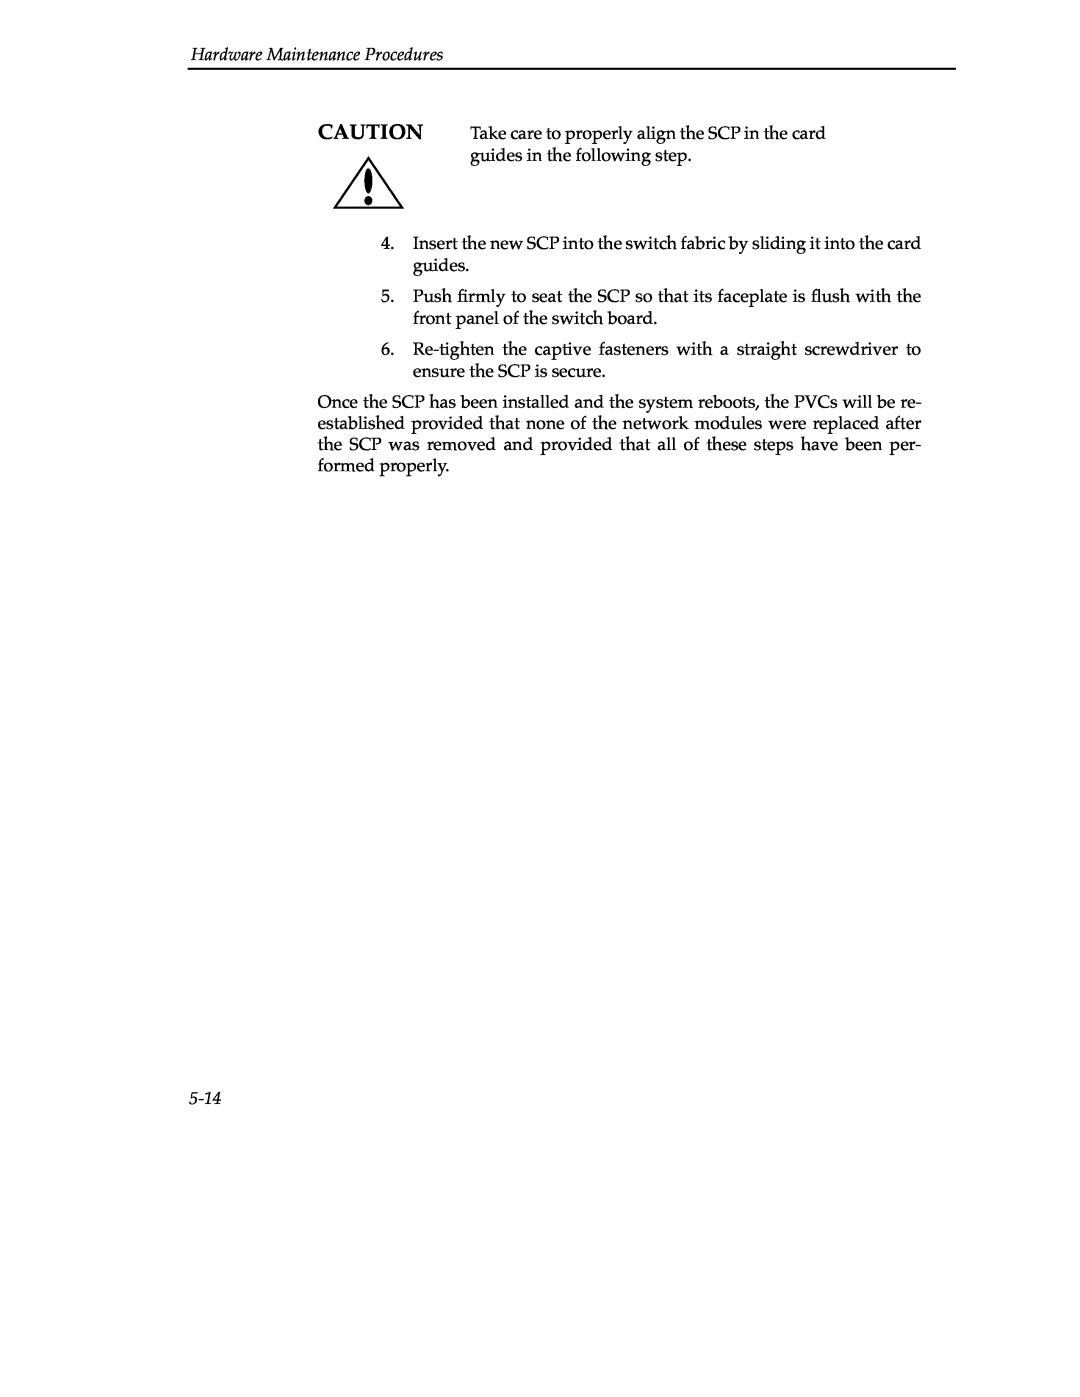 Cabletron Systems 9A000 manual 5-14, Hardware Maintenance Procedures 